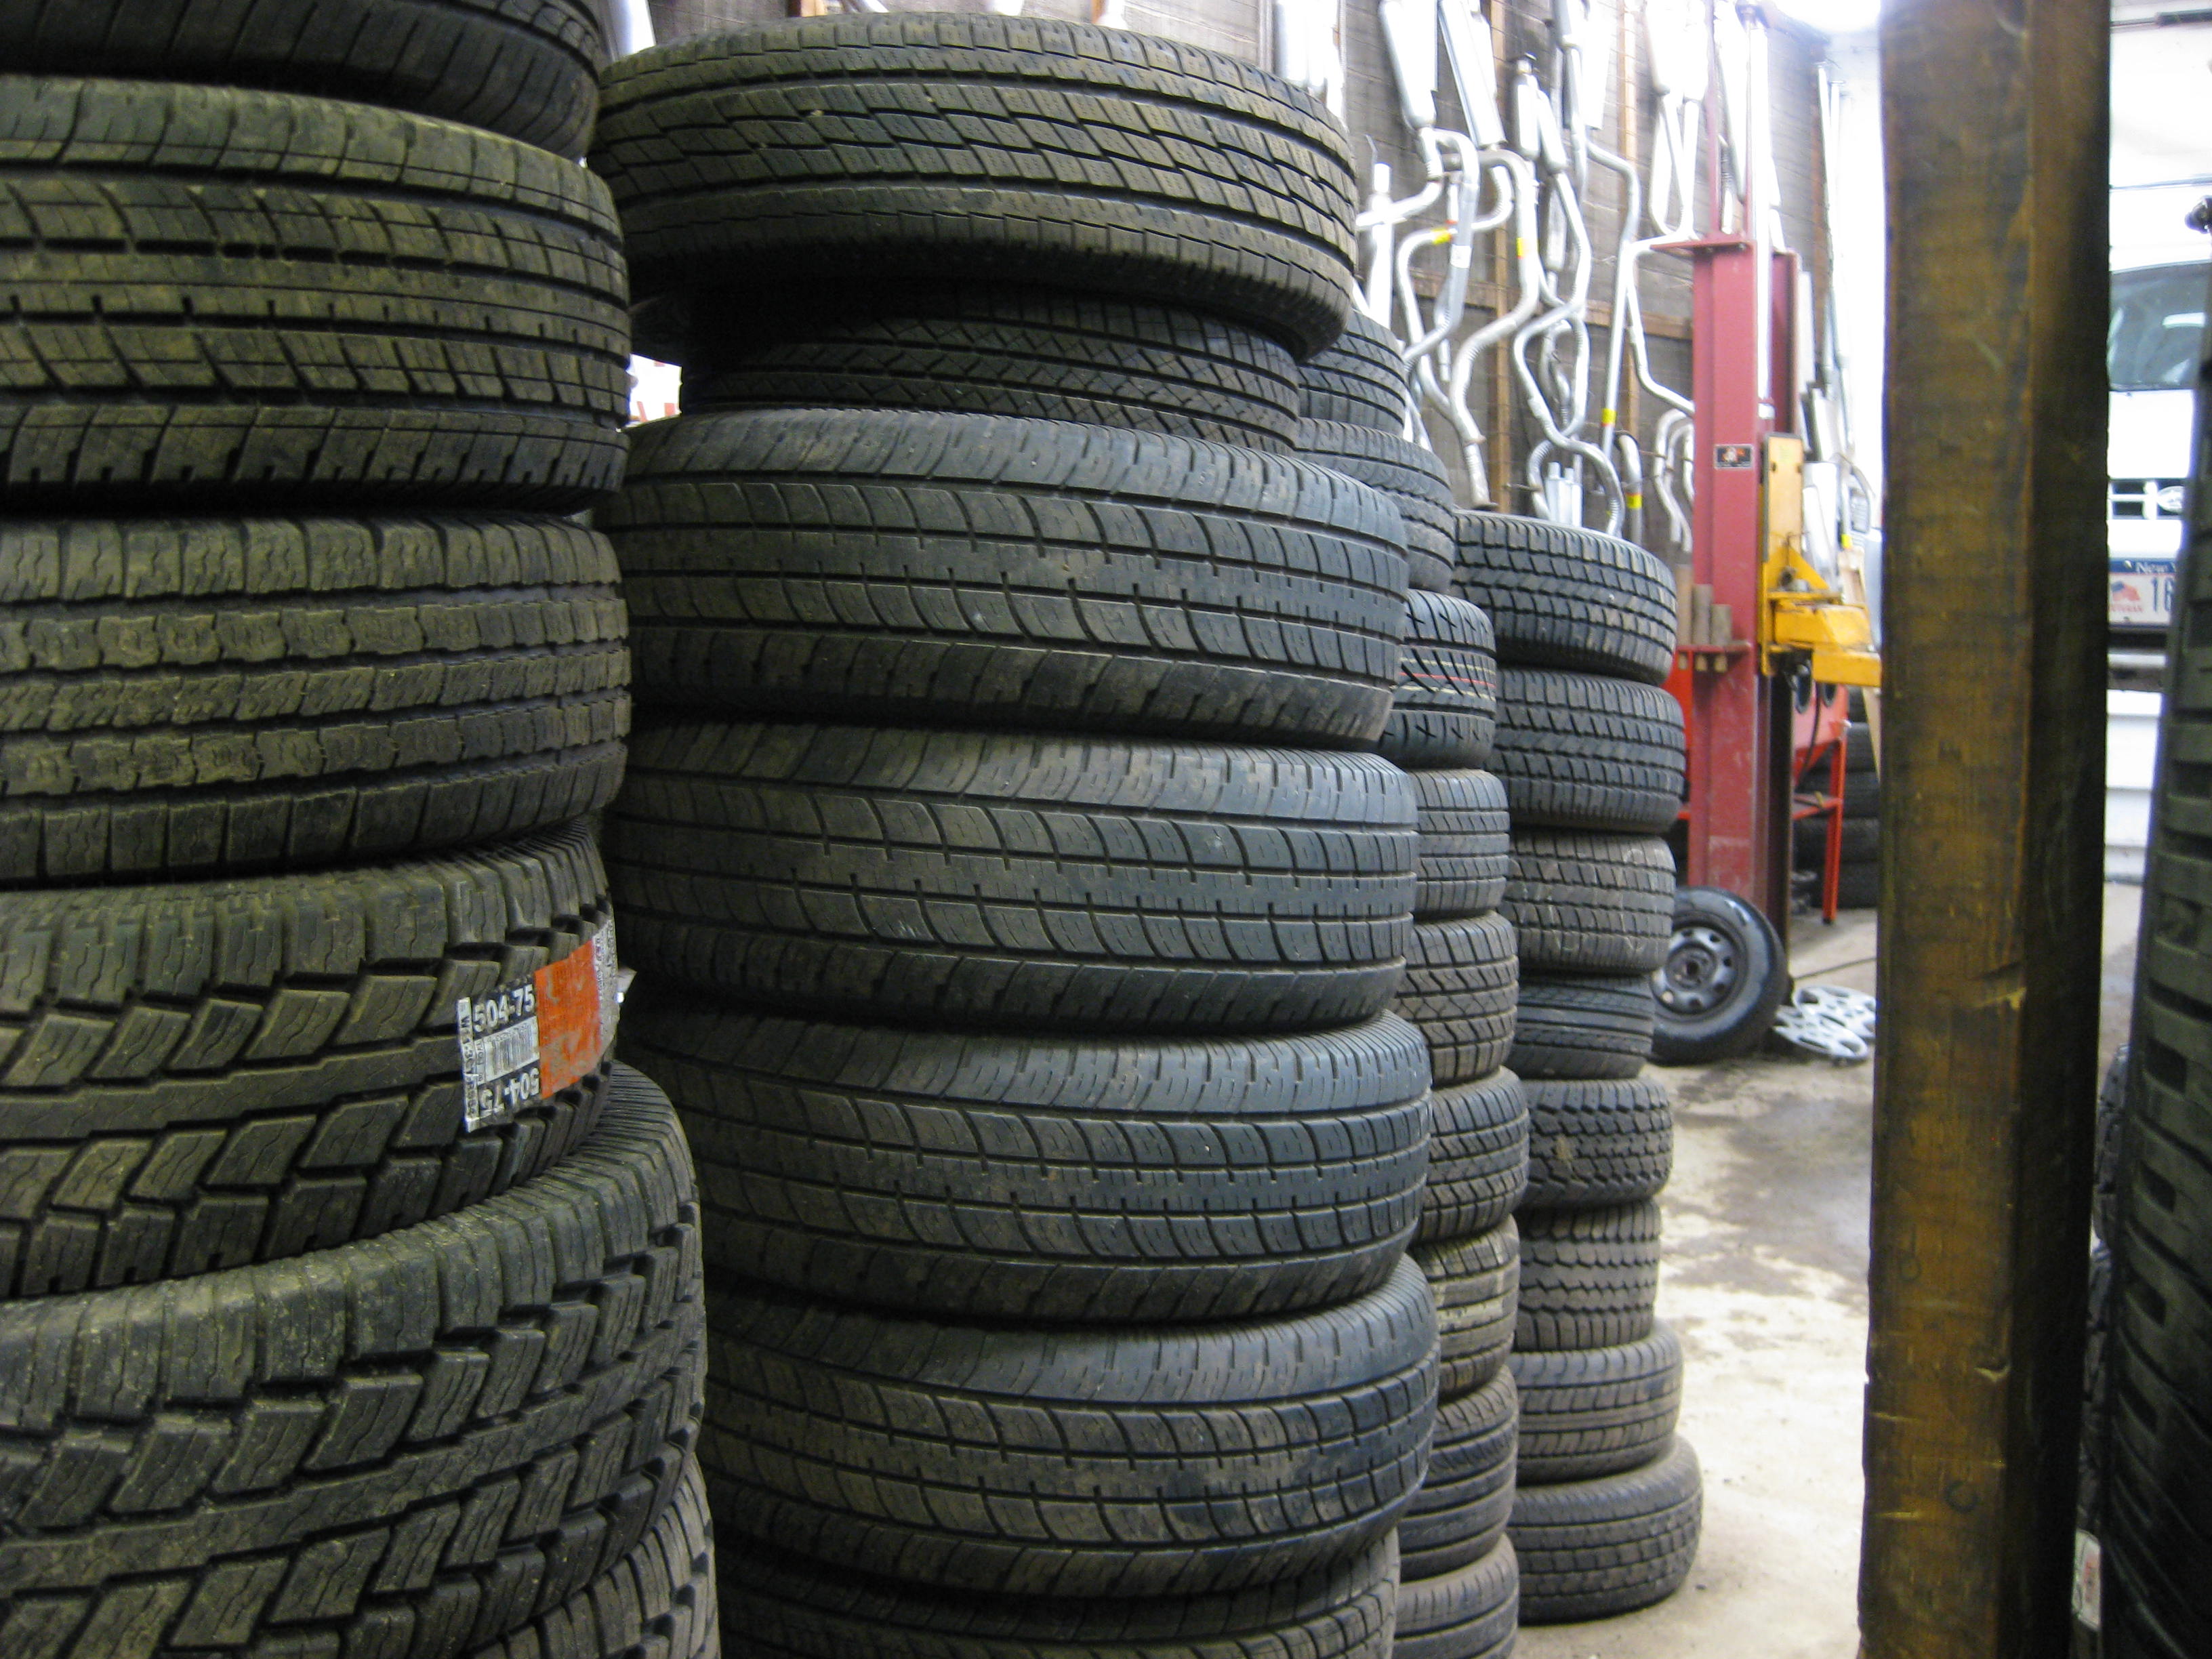 What Does “Buy 3 Tires, Get One Free” Really Mean?